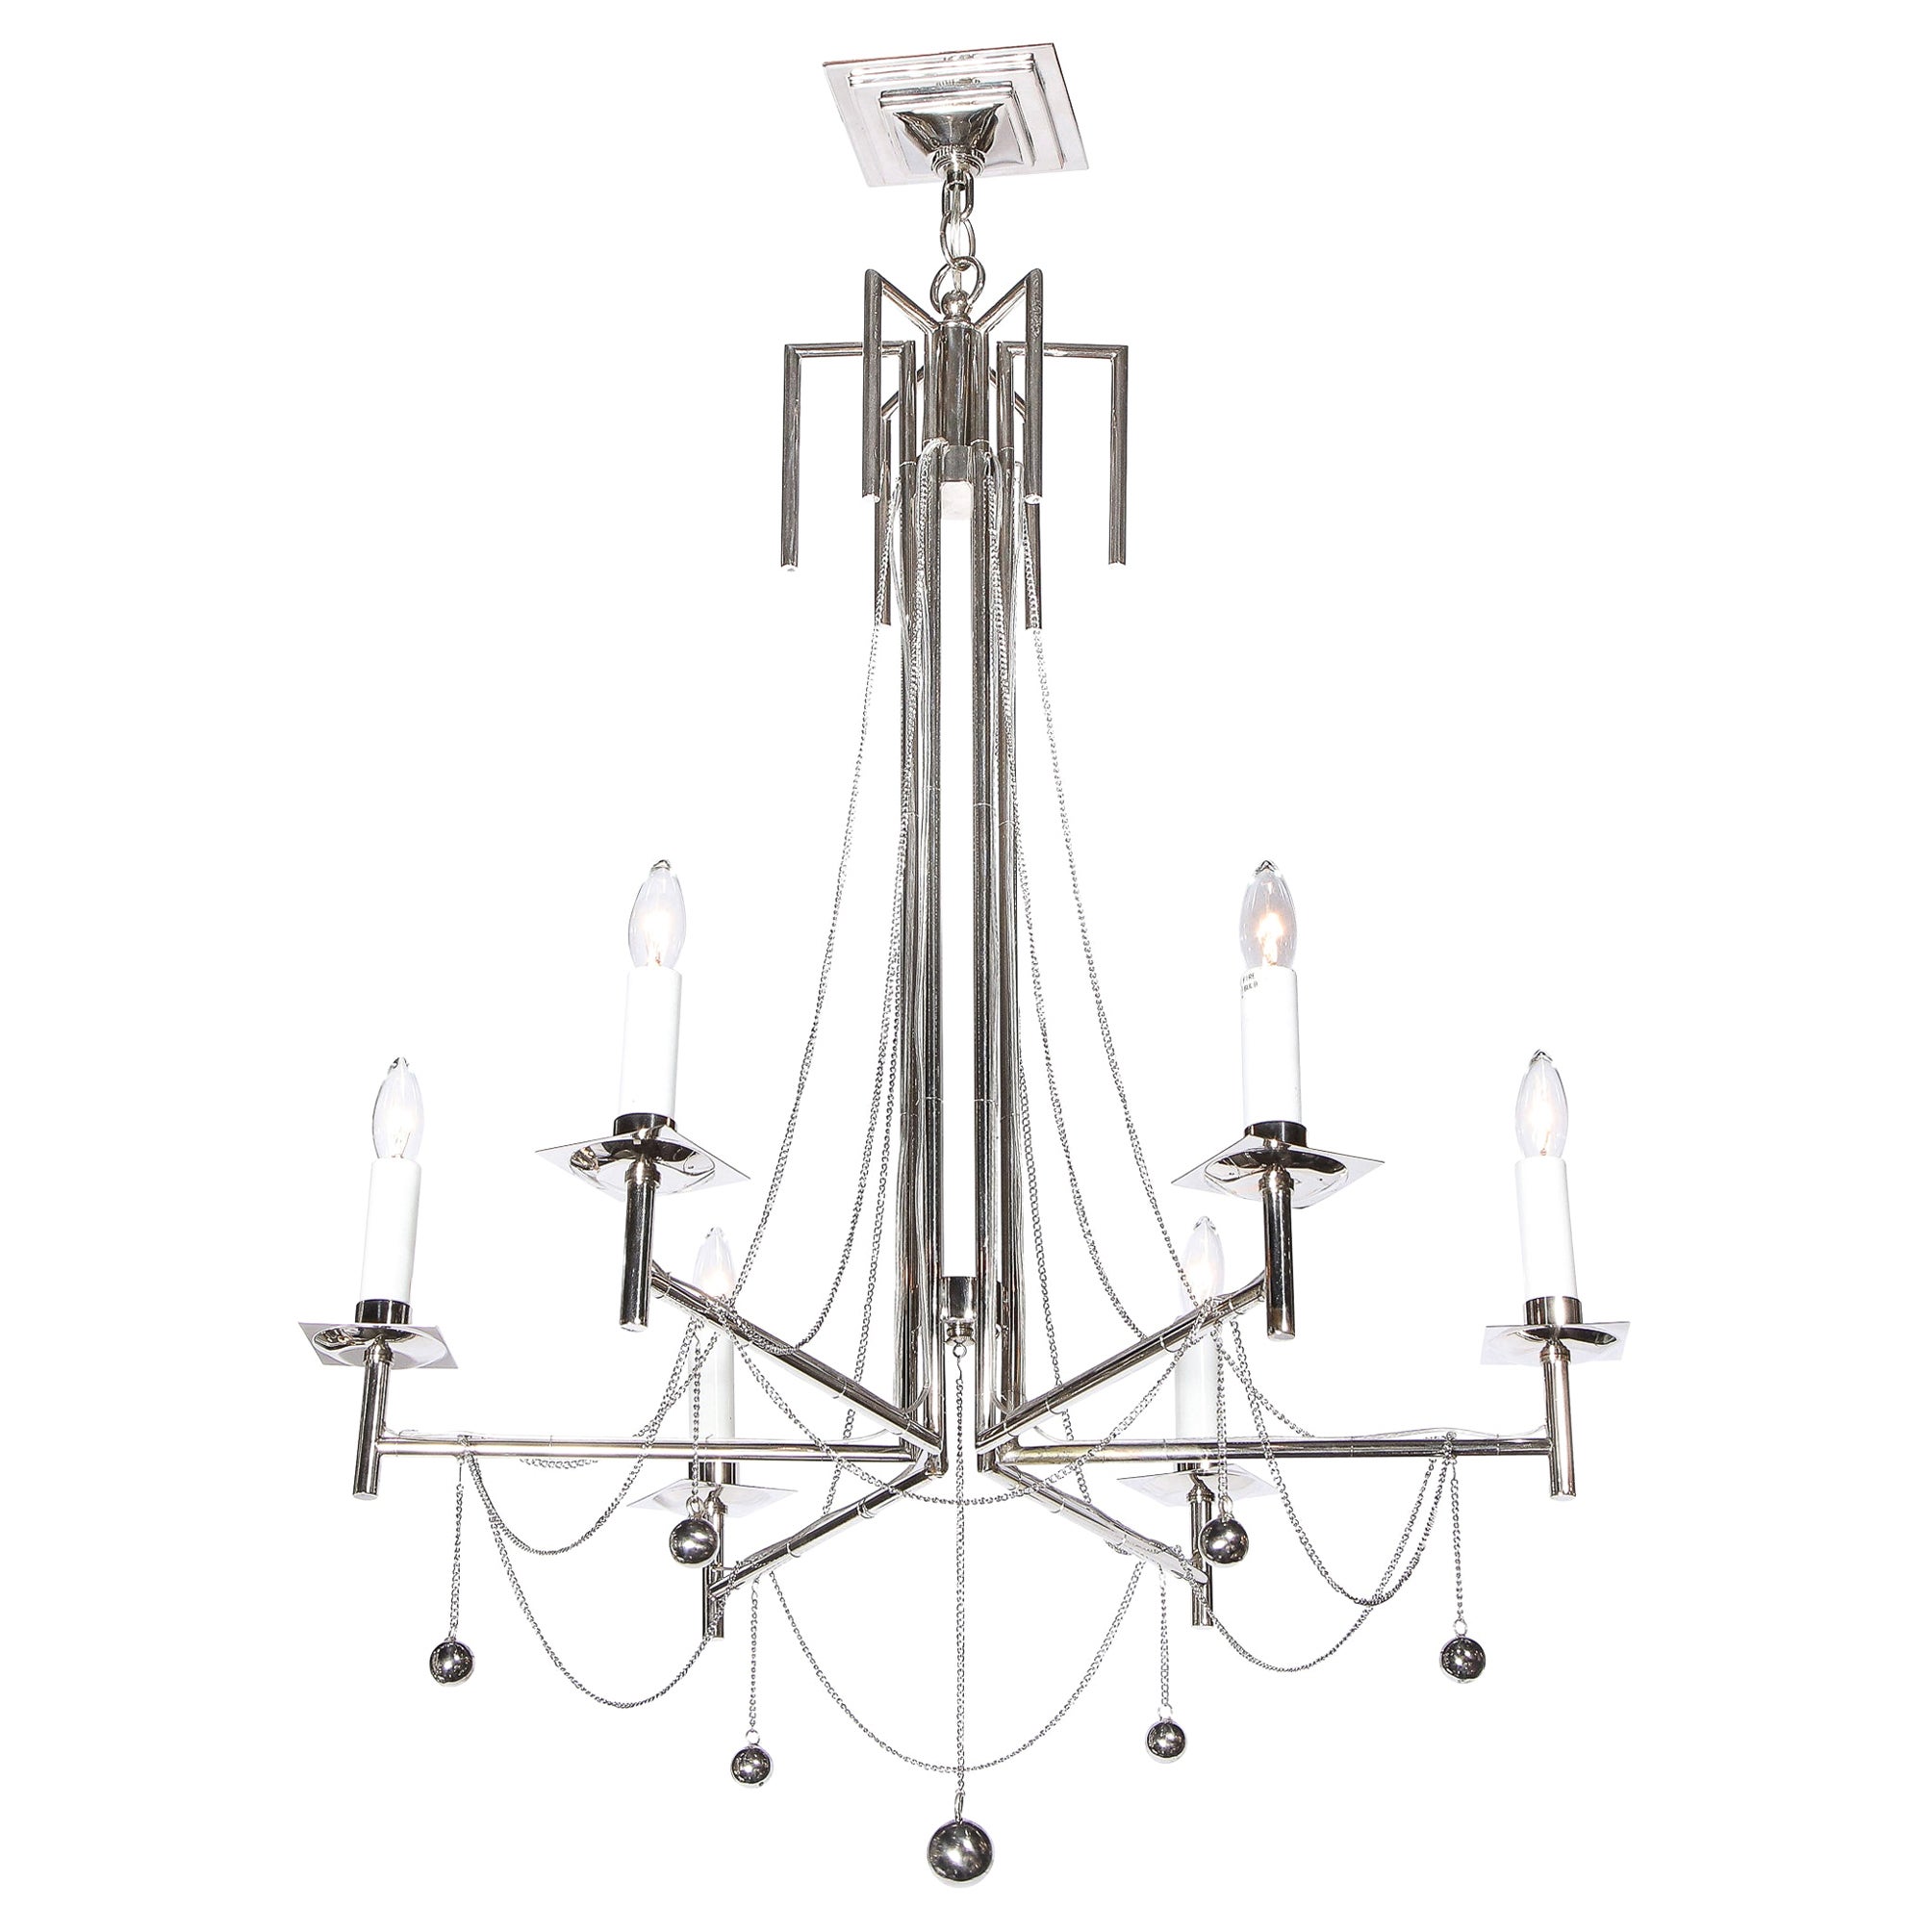 Modernist Polished Nickel Six Arm Chandelier with Chain and Spherical Details